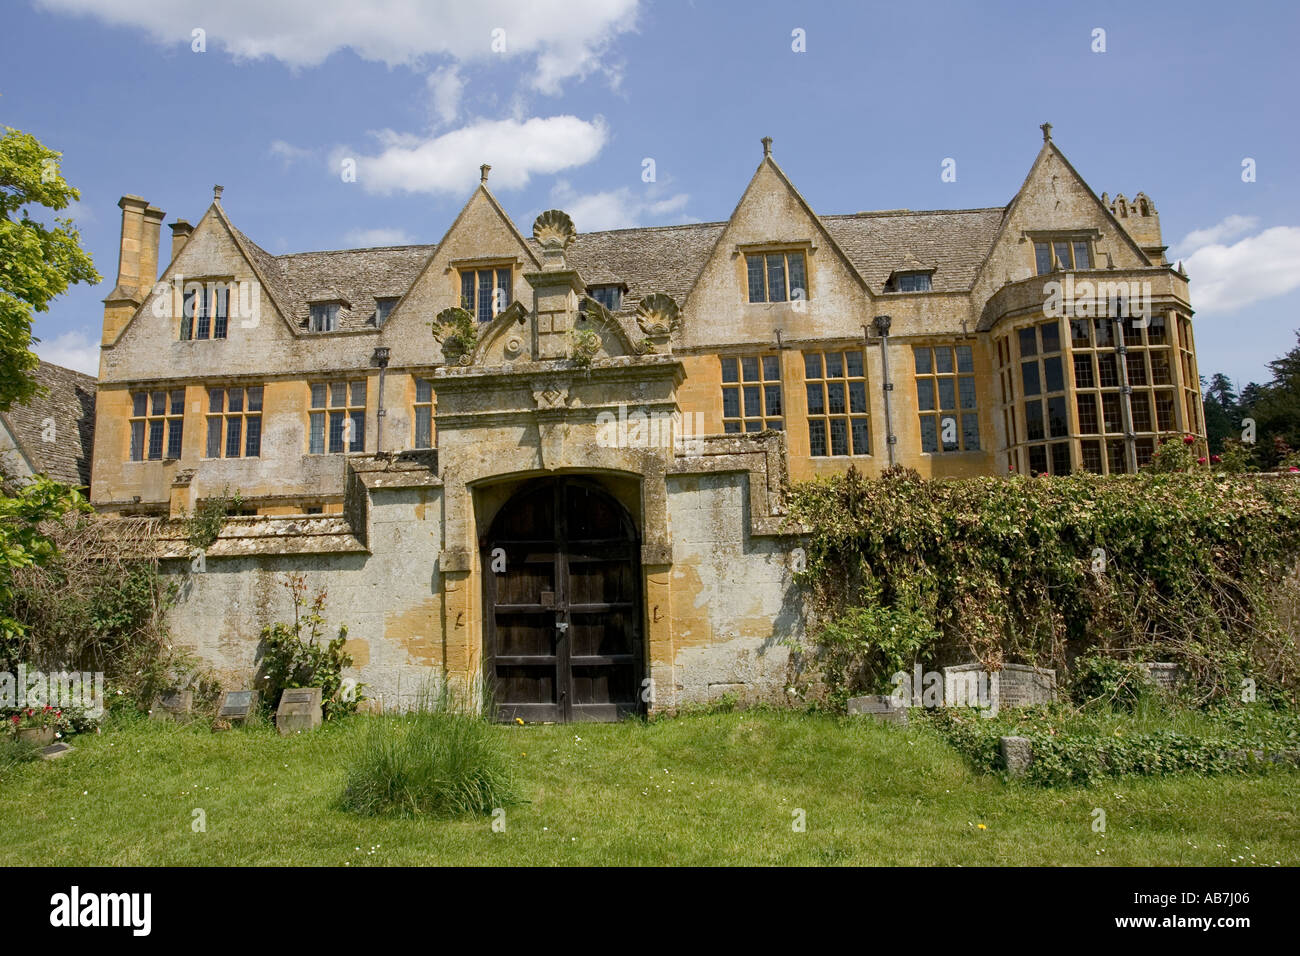 Stanway Manor House built in Jacobean period architecture 1630 in Guiting yellow stone Stanton Cotswolds UK Stock Photo